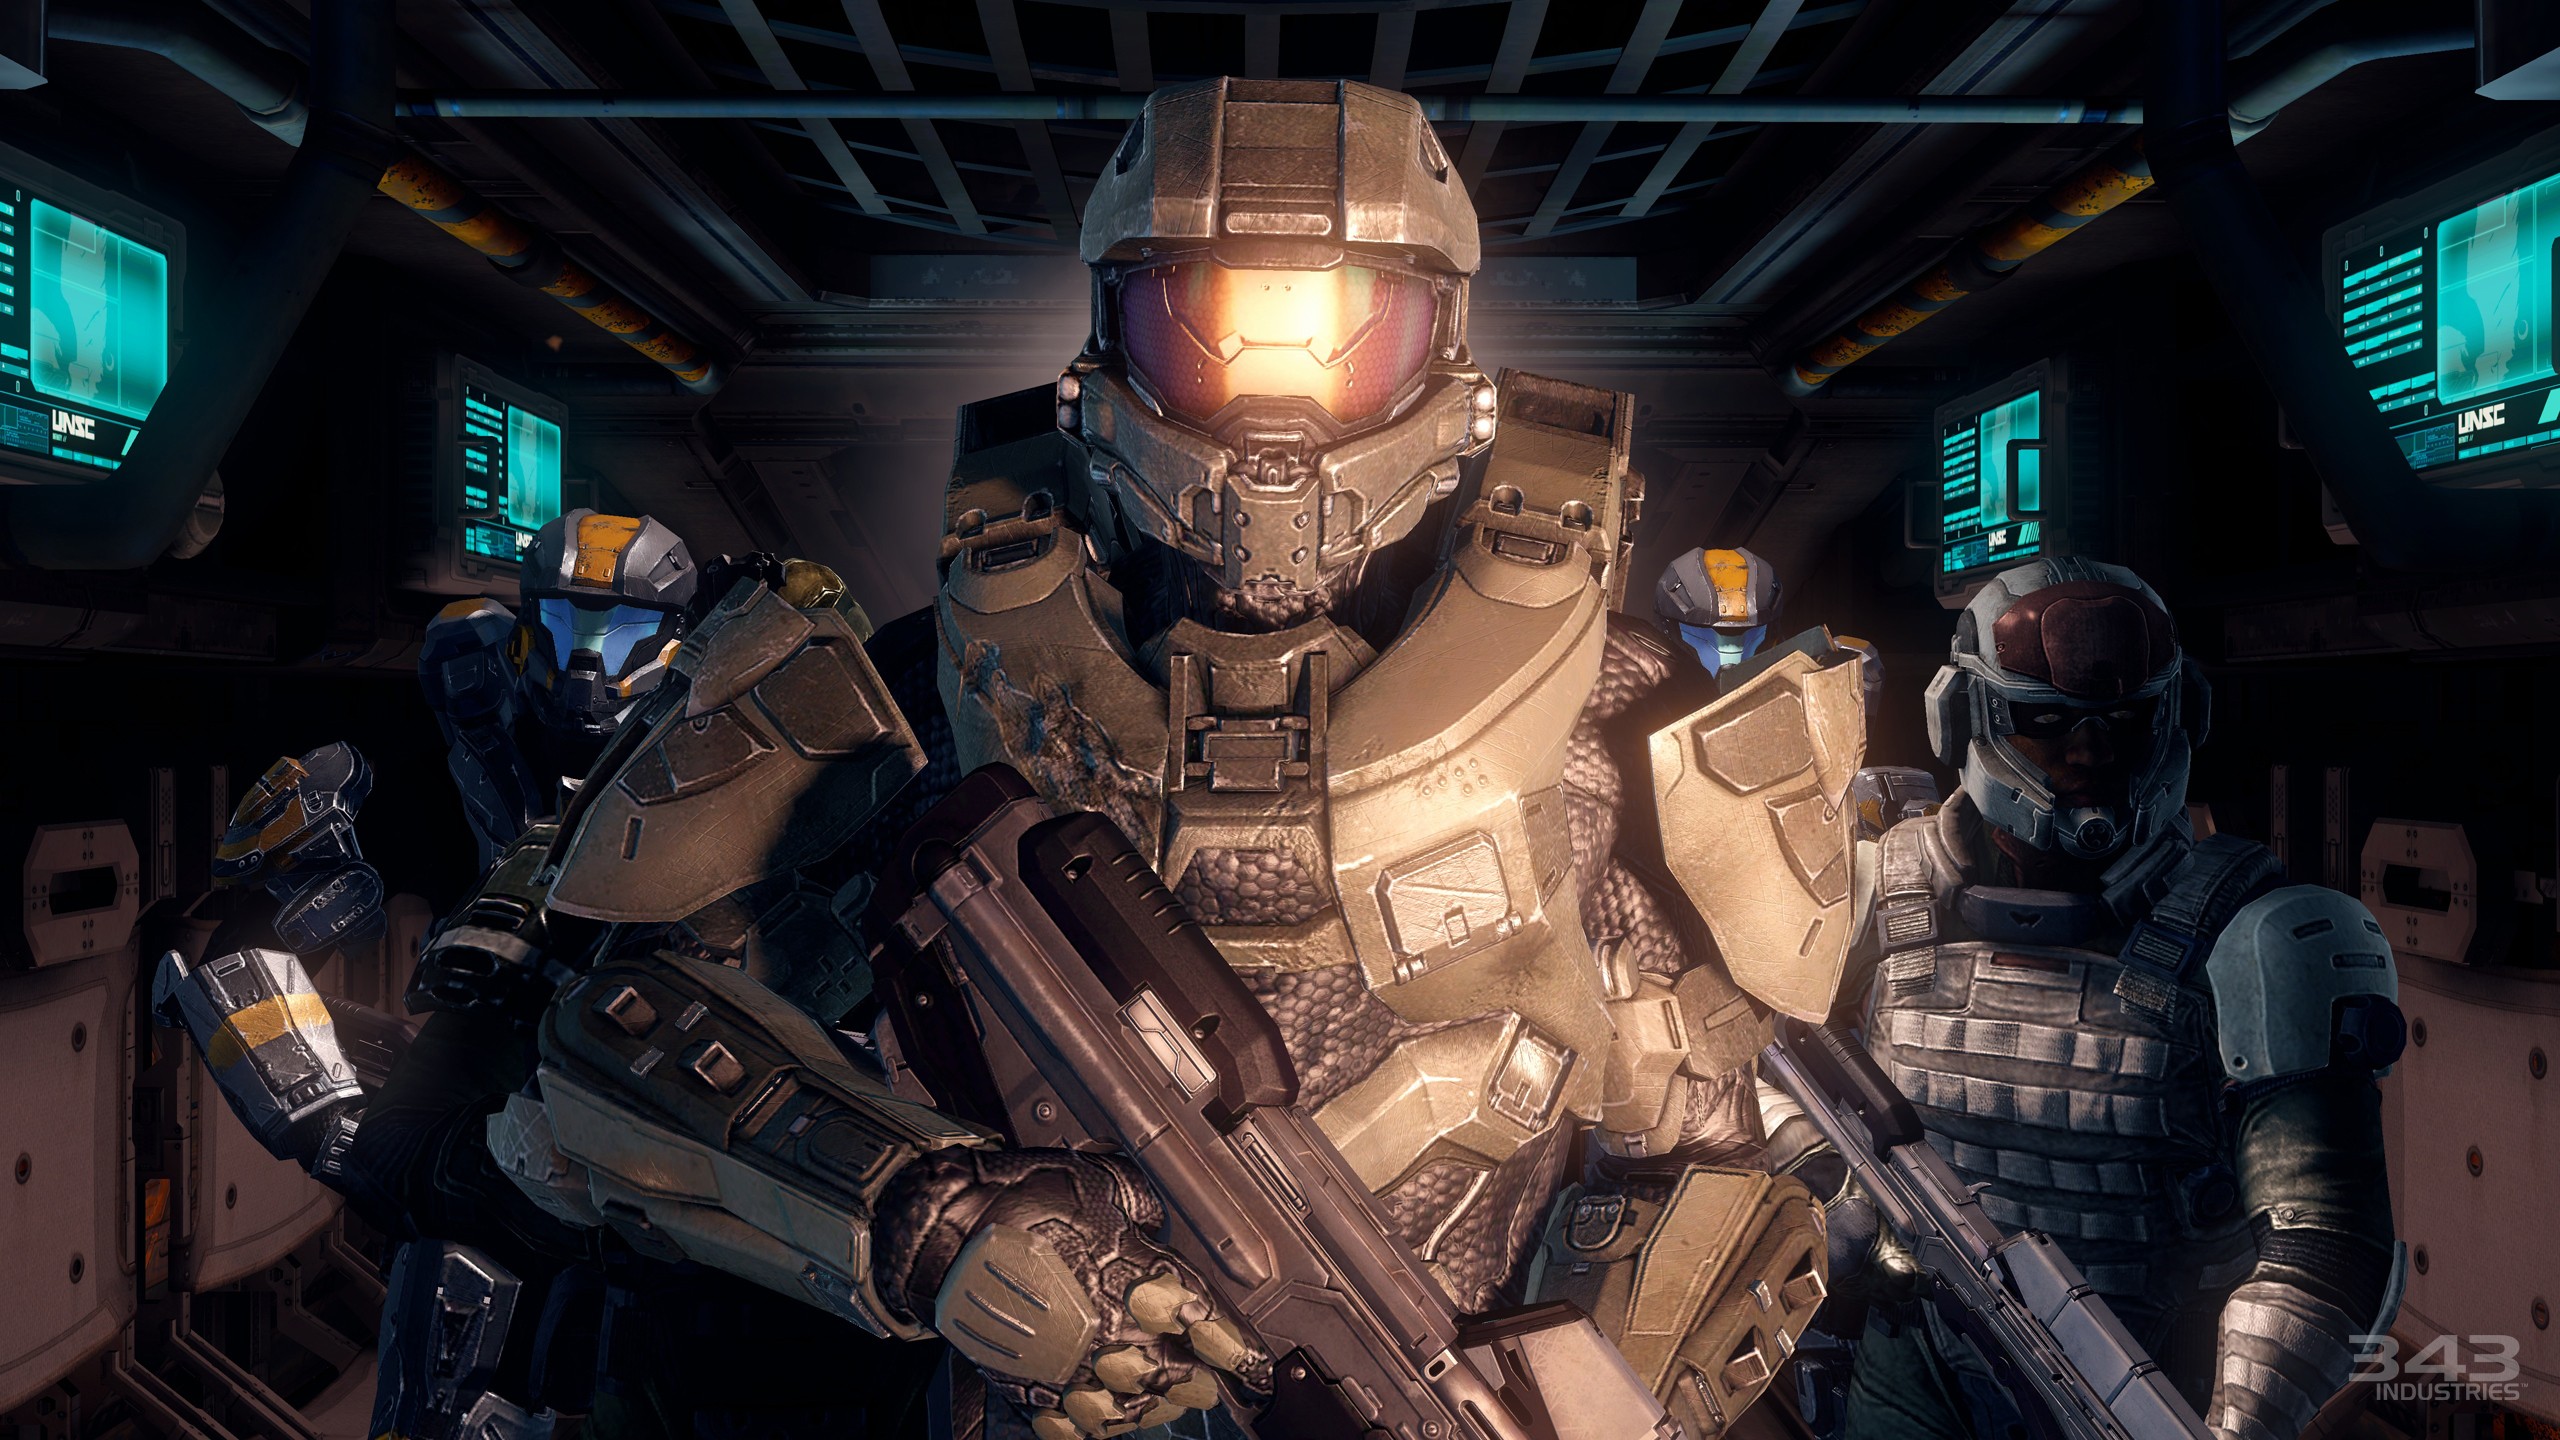 General 2560x1440 Halo 4 343 Industries Halo: The Master Chief Collection video games Halo (game) video game art science fiction Master Chief (Halo) futuristic armor video game characters